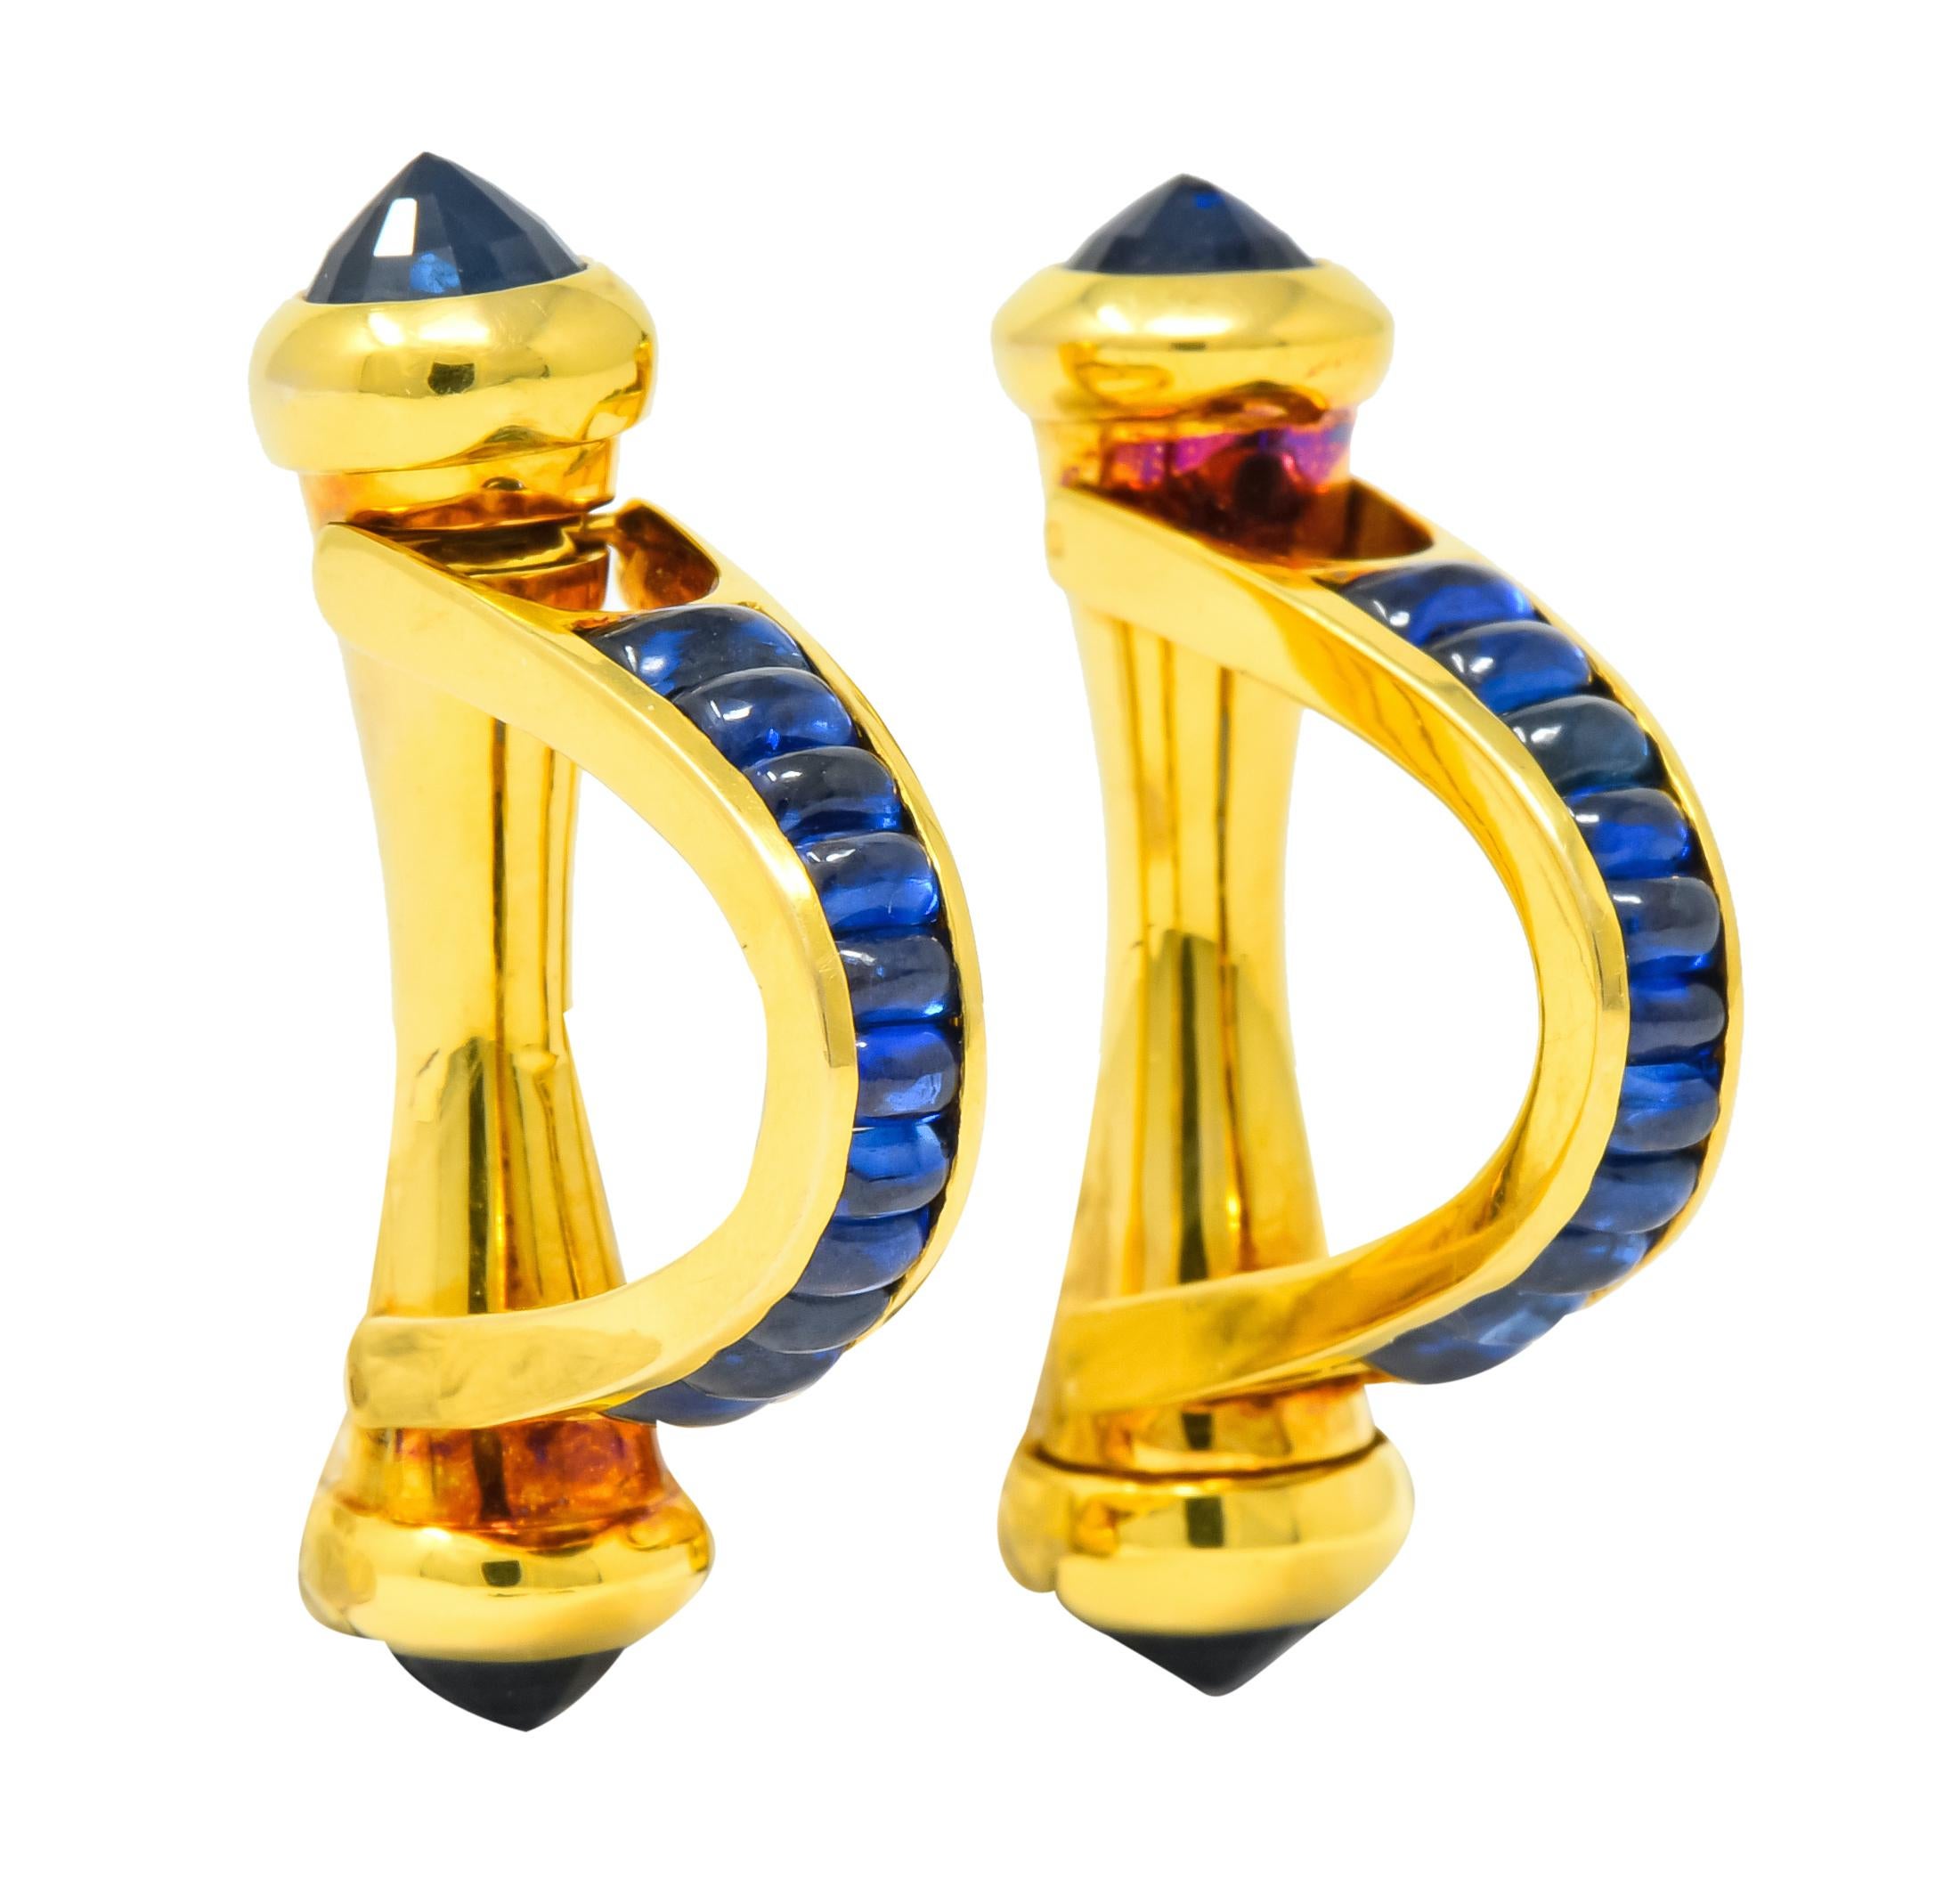 Around-the-cuff style cufflinks with a hinged, spring loaded closure that terminates in mixed cut reverse set sapphires

With cushion cabochon sapphires, graduating in size, channel set in polished gold

Sapphires are a very well matched royal blue